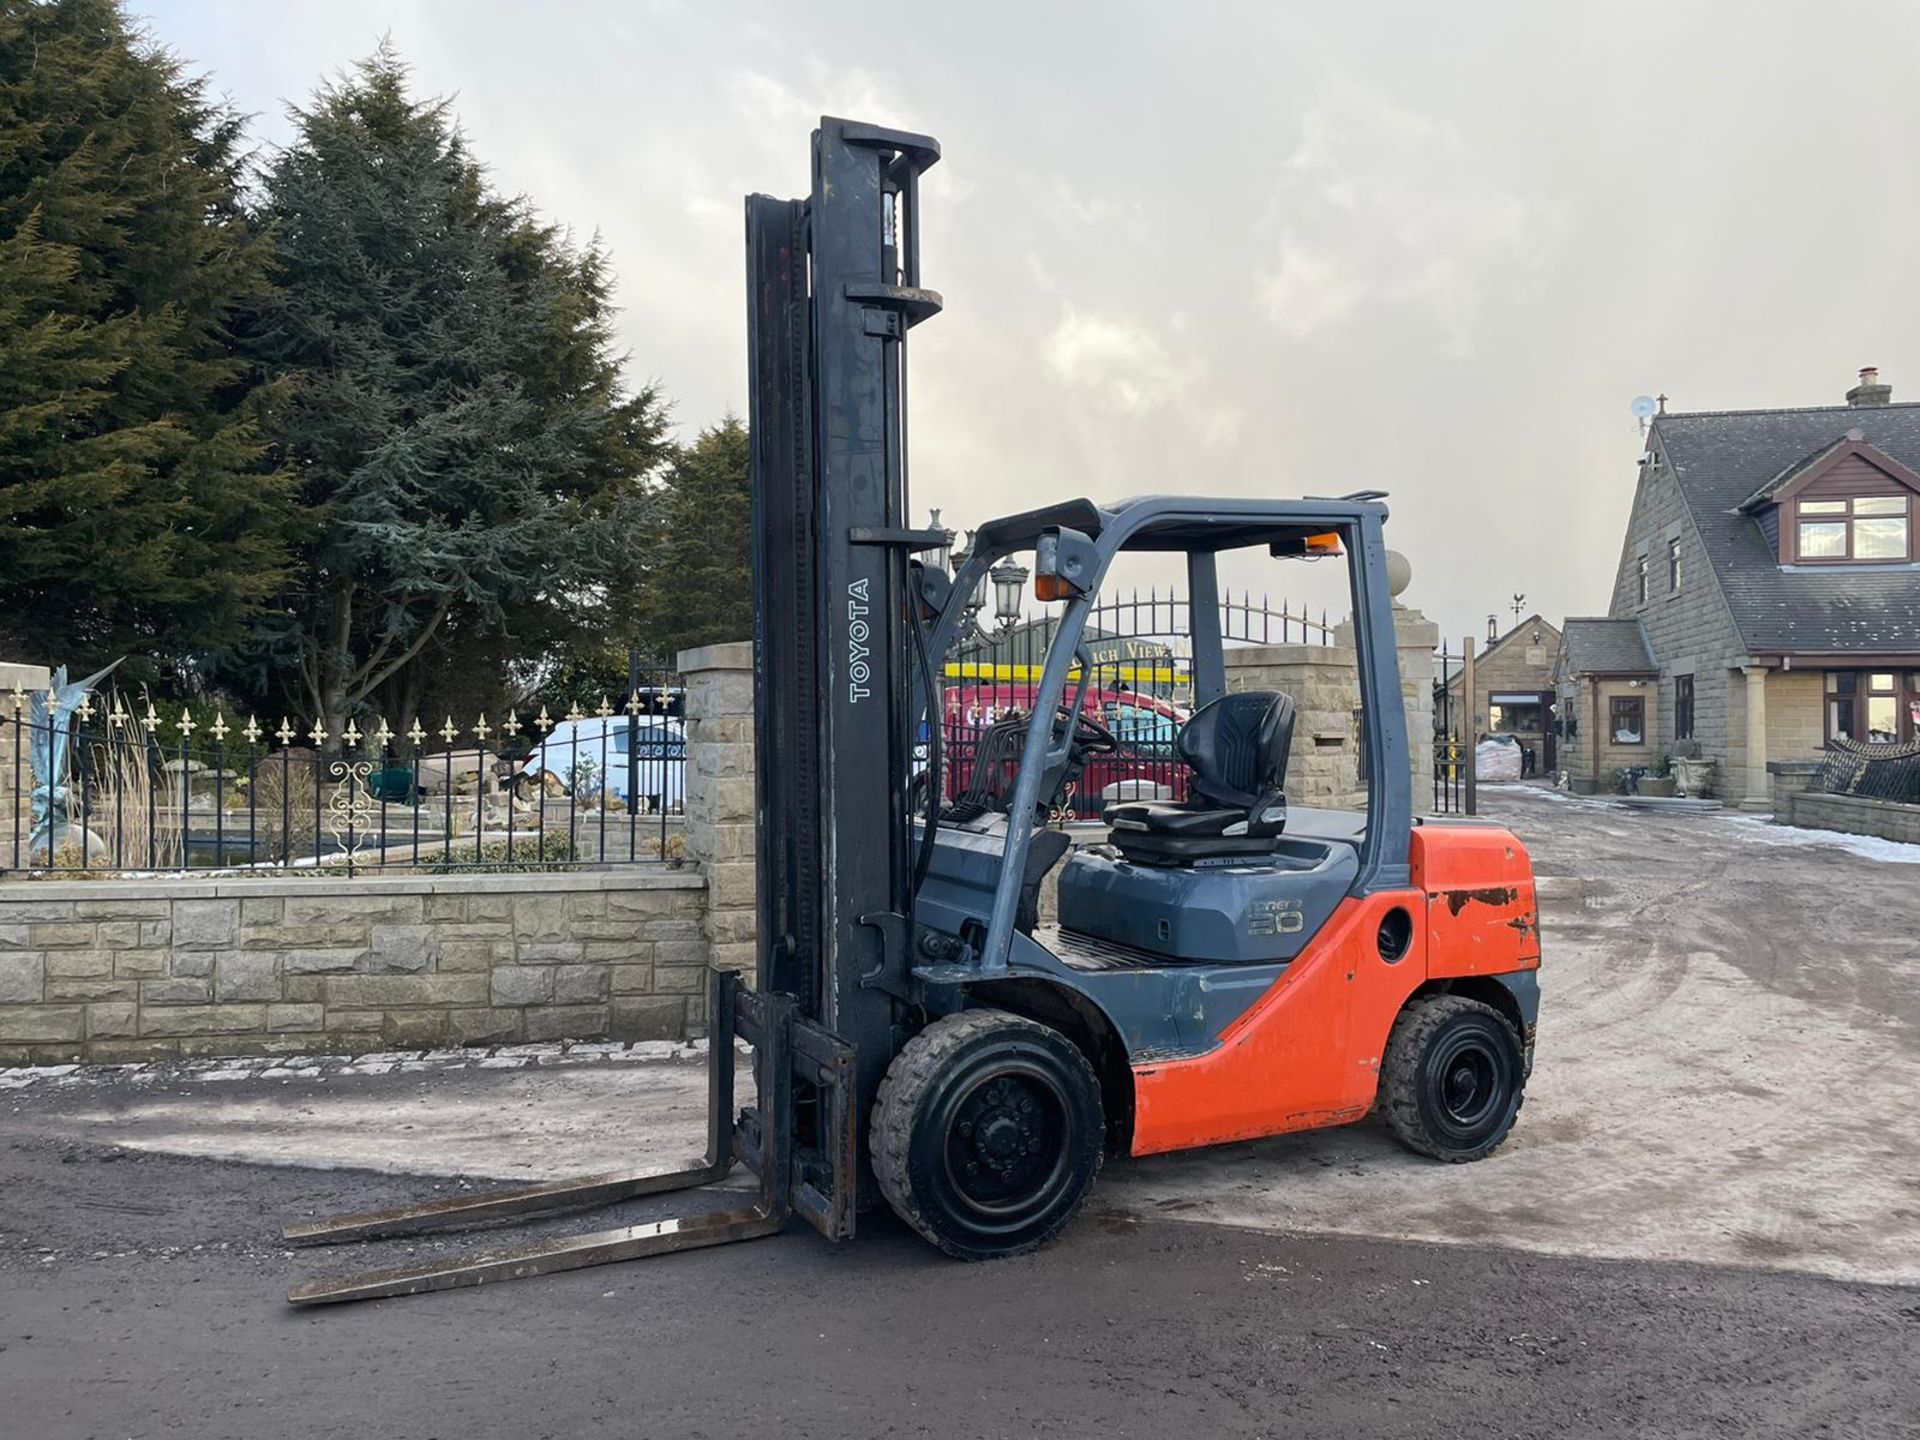 2013 TOYOTA TONERO 30 FORKLIFT, RUNS, DRIVES AND LIFTS, LOW 4720 HOURS, CLEAN MACHINE *PLUS VAT* - Image 2 of 9